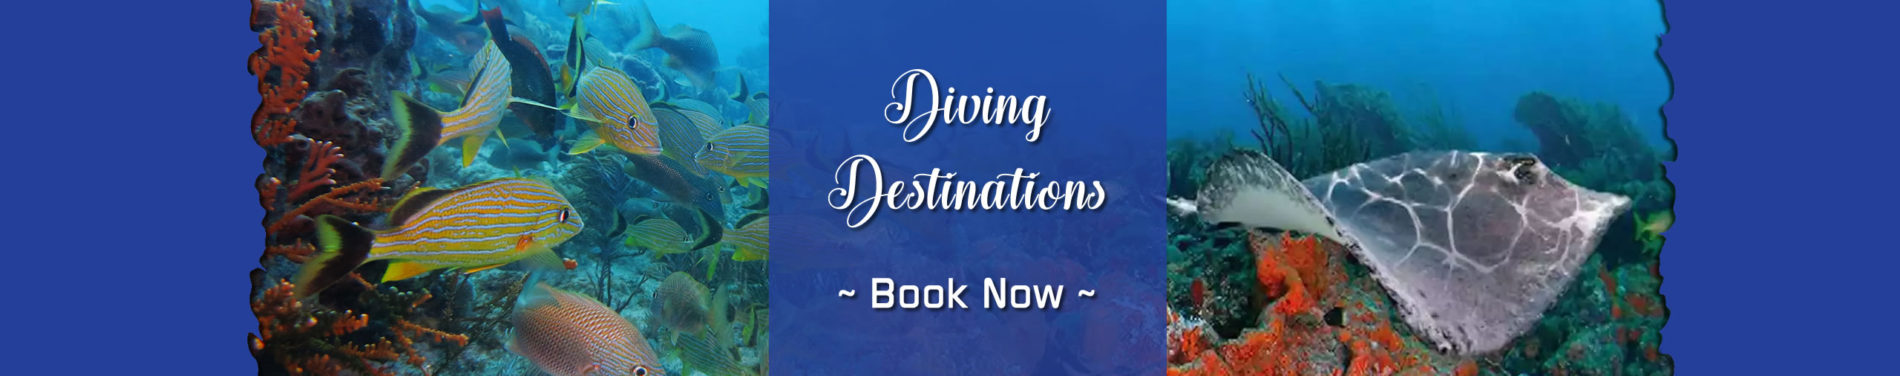 YKnot Key West Charters - Diving Destinations